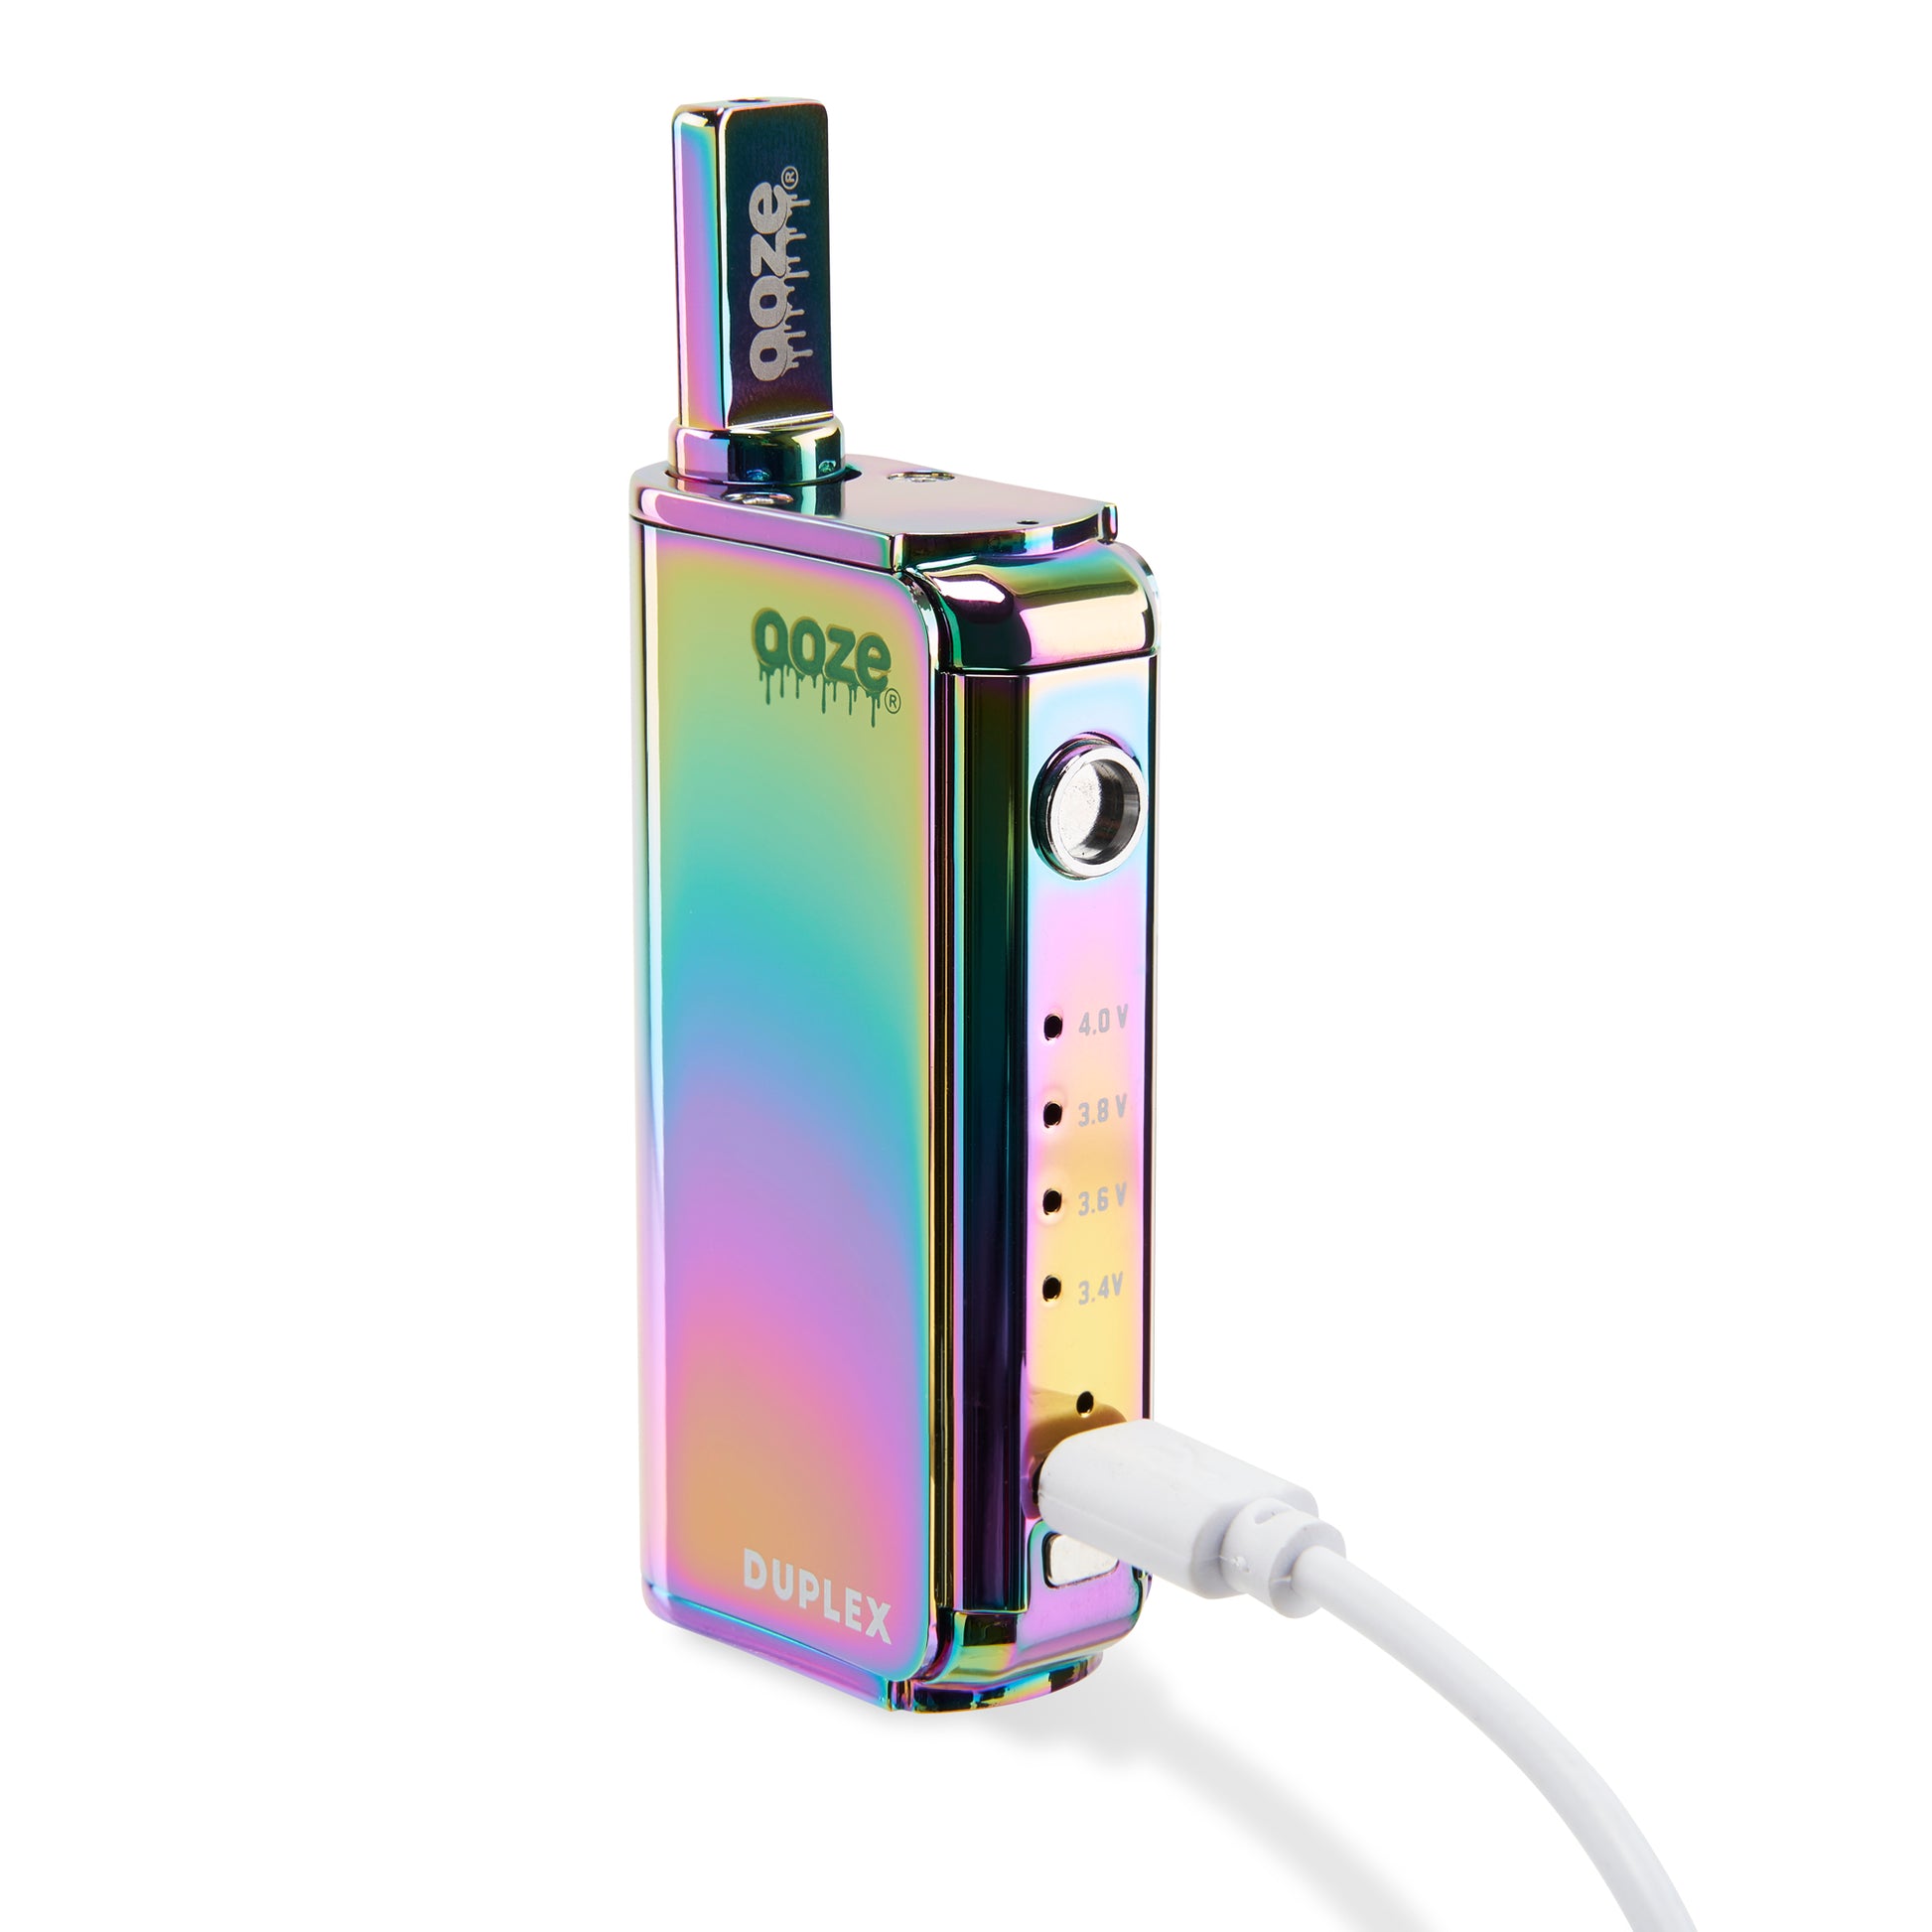 The Rainbow Ooze Duplex Pro Vaporizer is shown with the button removed and the type-c charger plugged in.